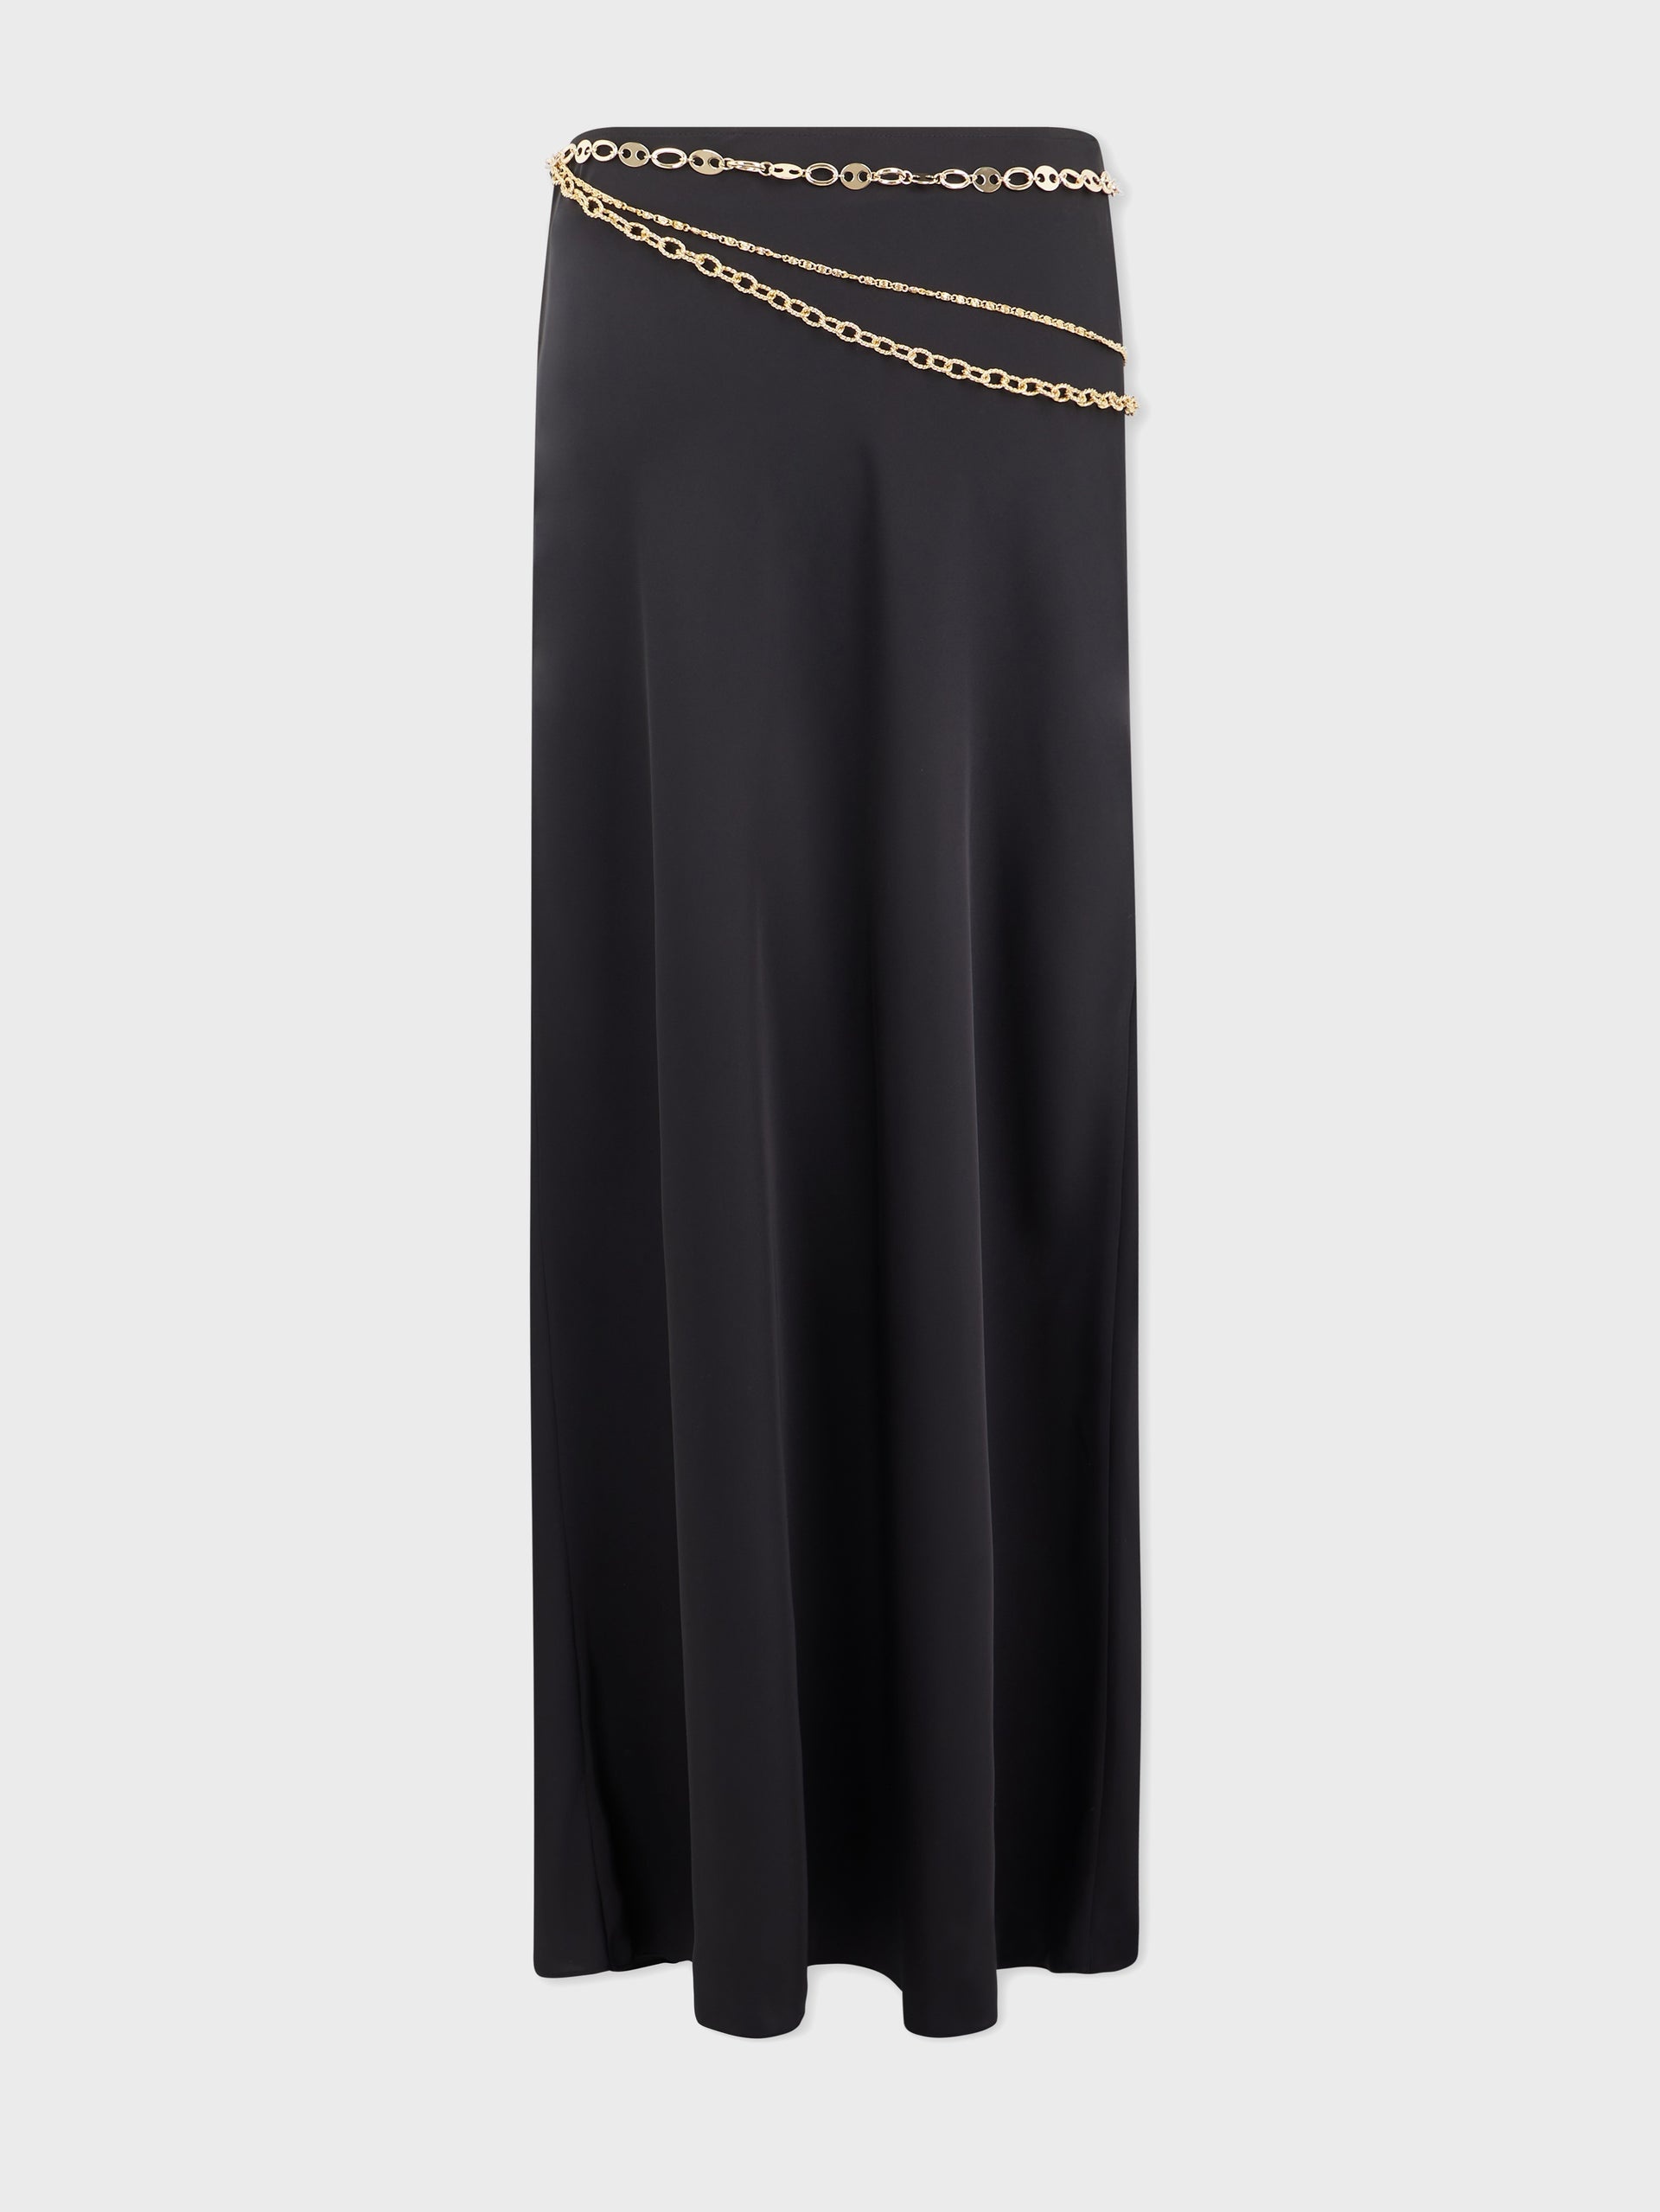 LONG BLACK SKIRT EMBELLISHED WITH "EIGHT" SIGNATURE CHAIN - 6